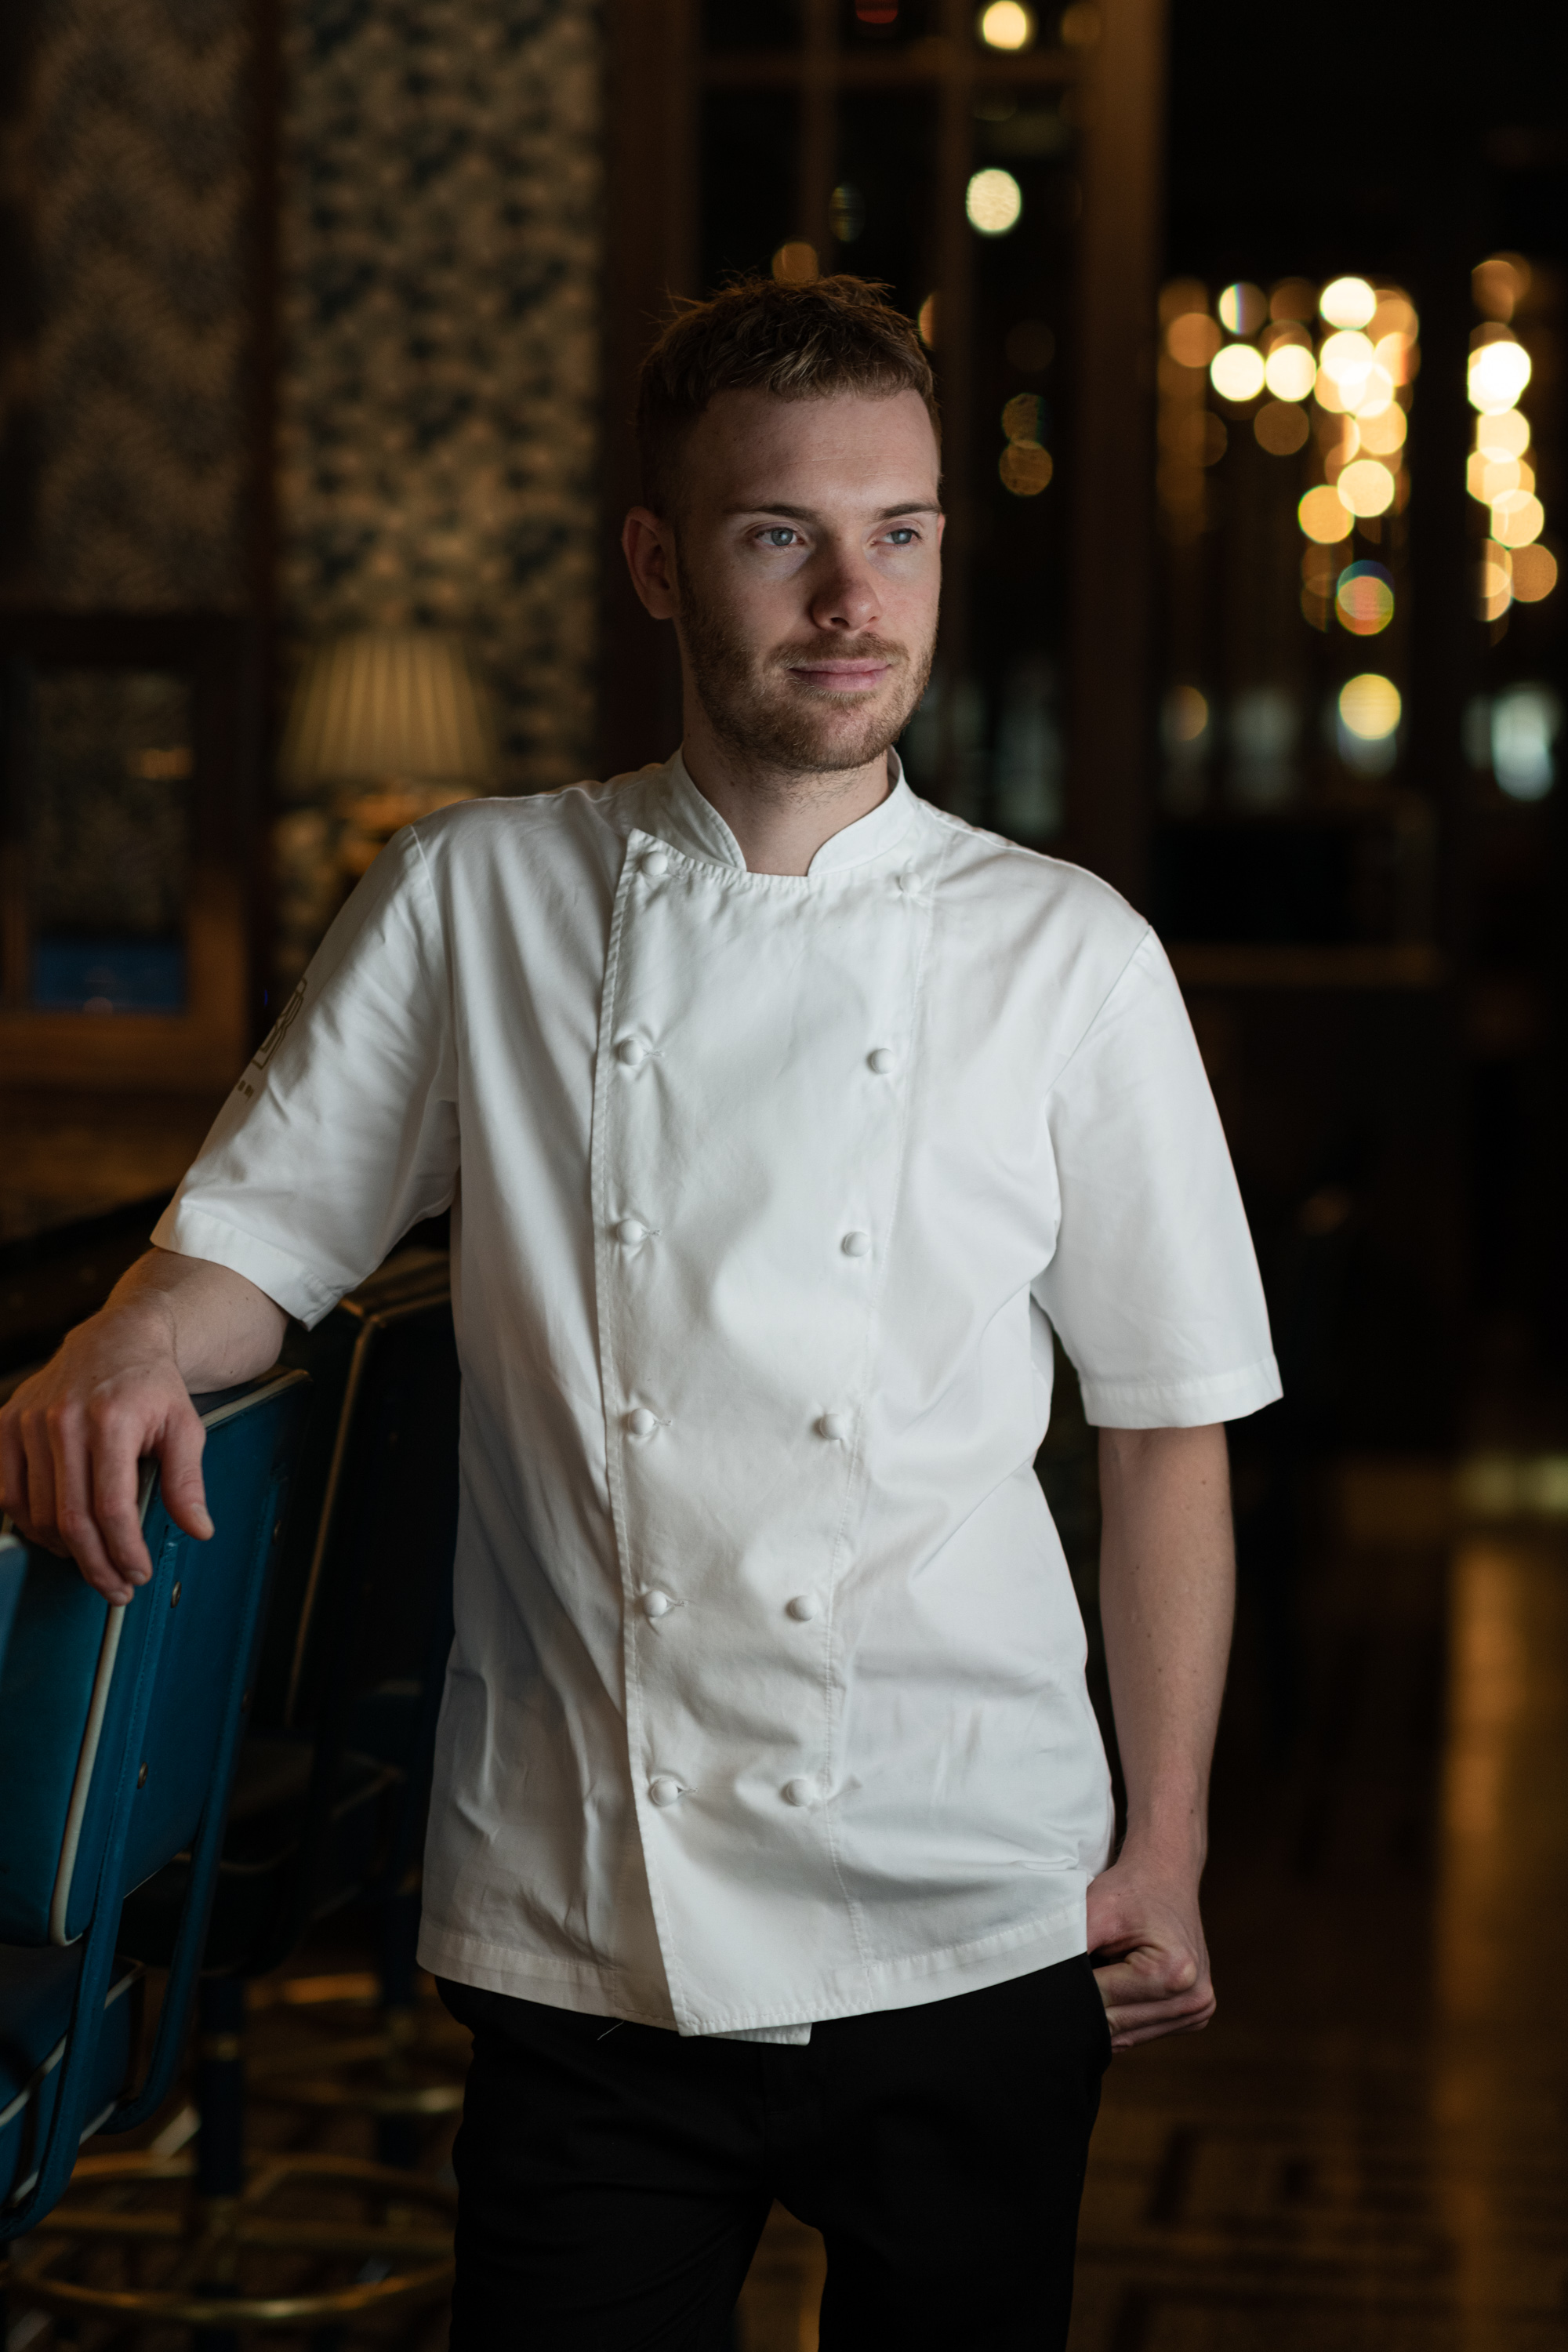 An interview with Bob Bob Ricard’s new Head Chef Tom Peters